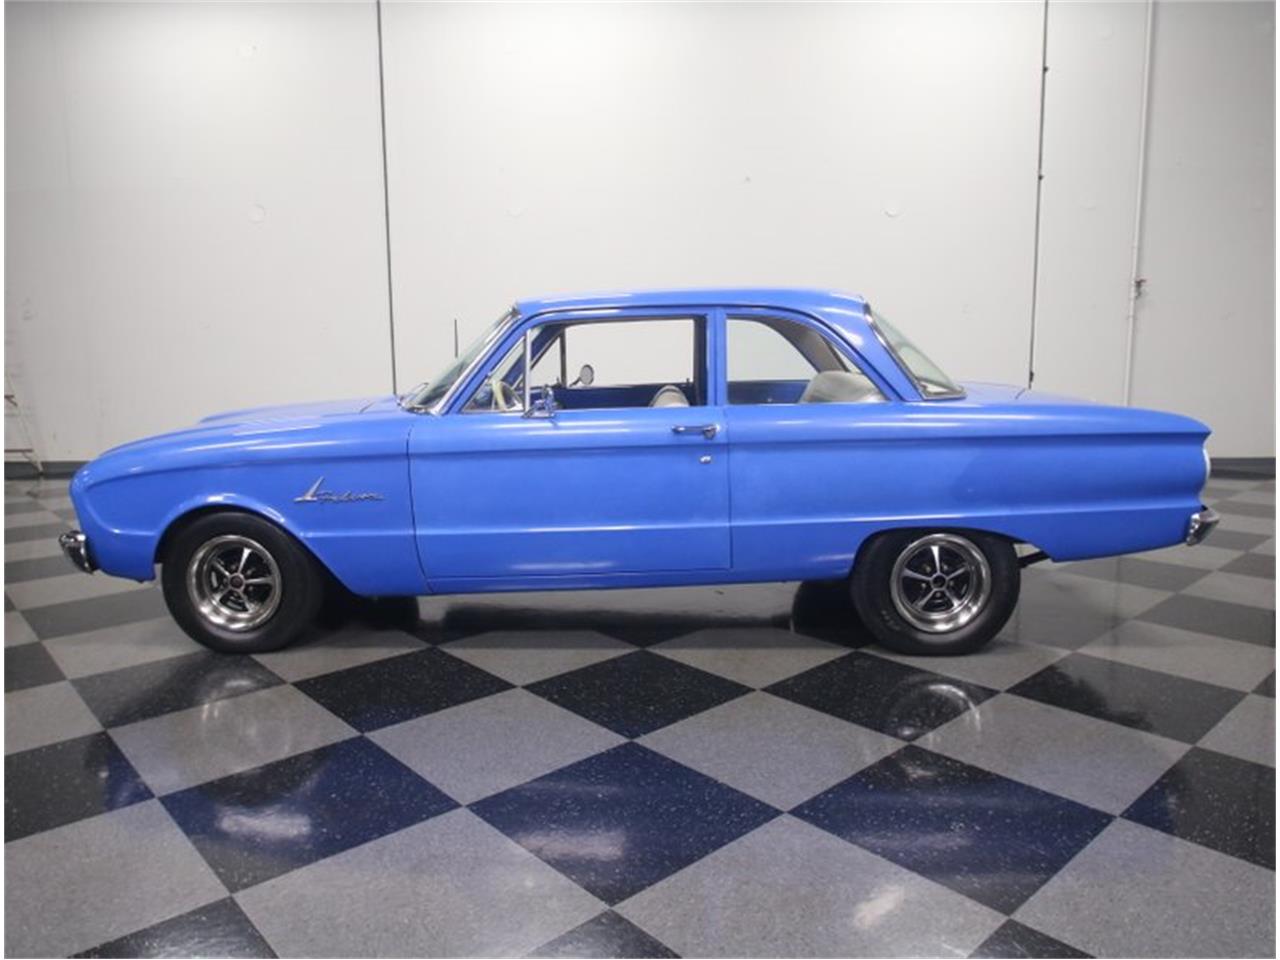 61 ford flacon for sale